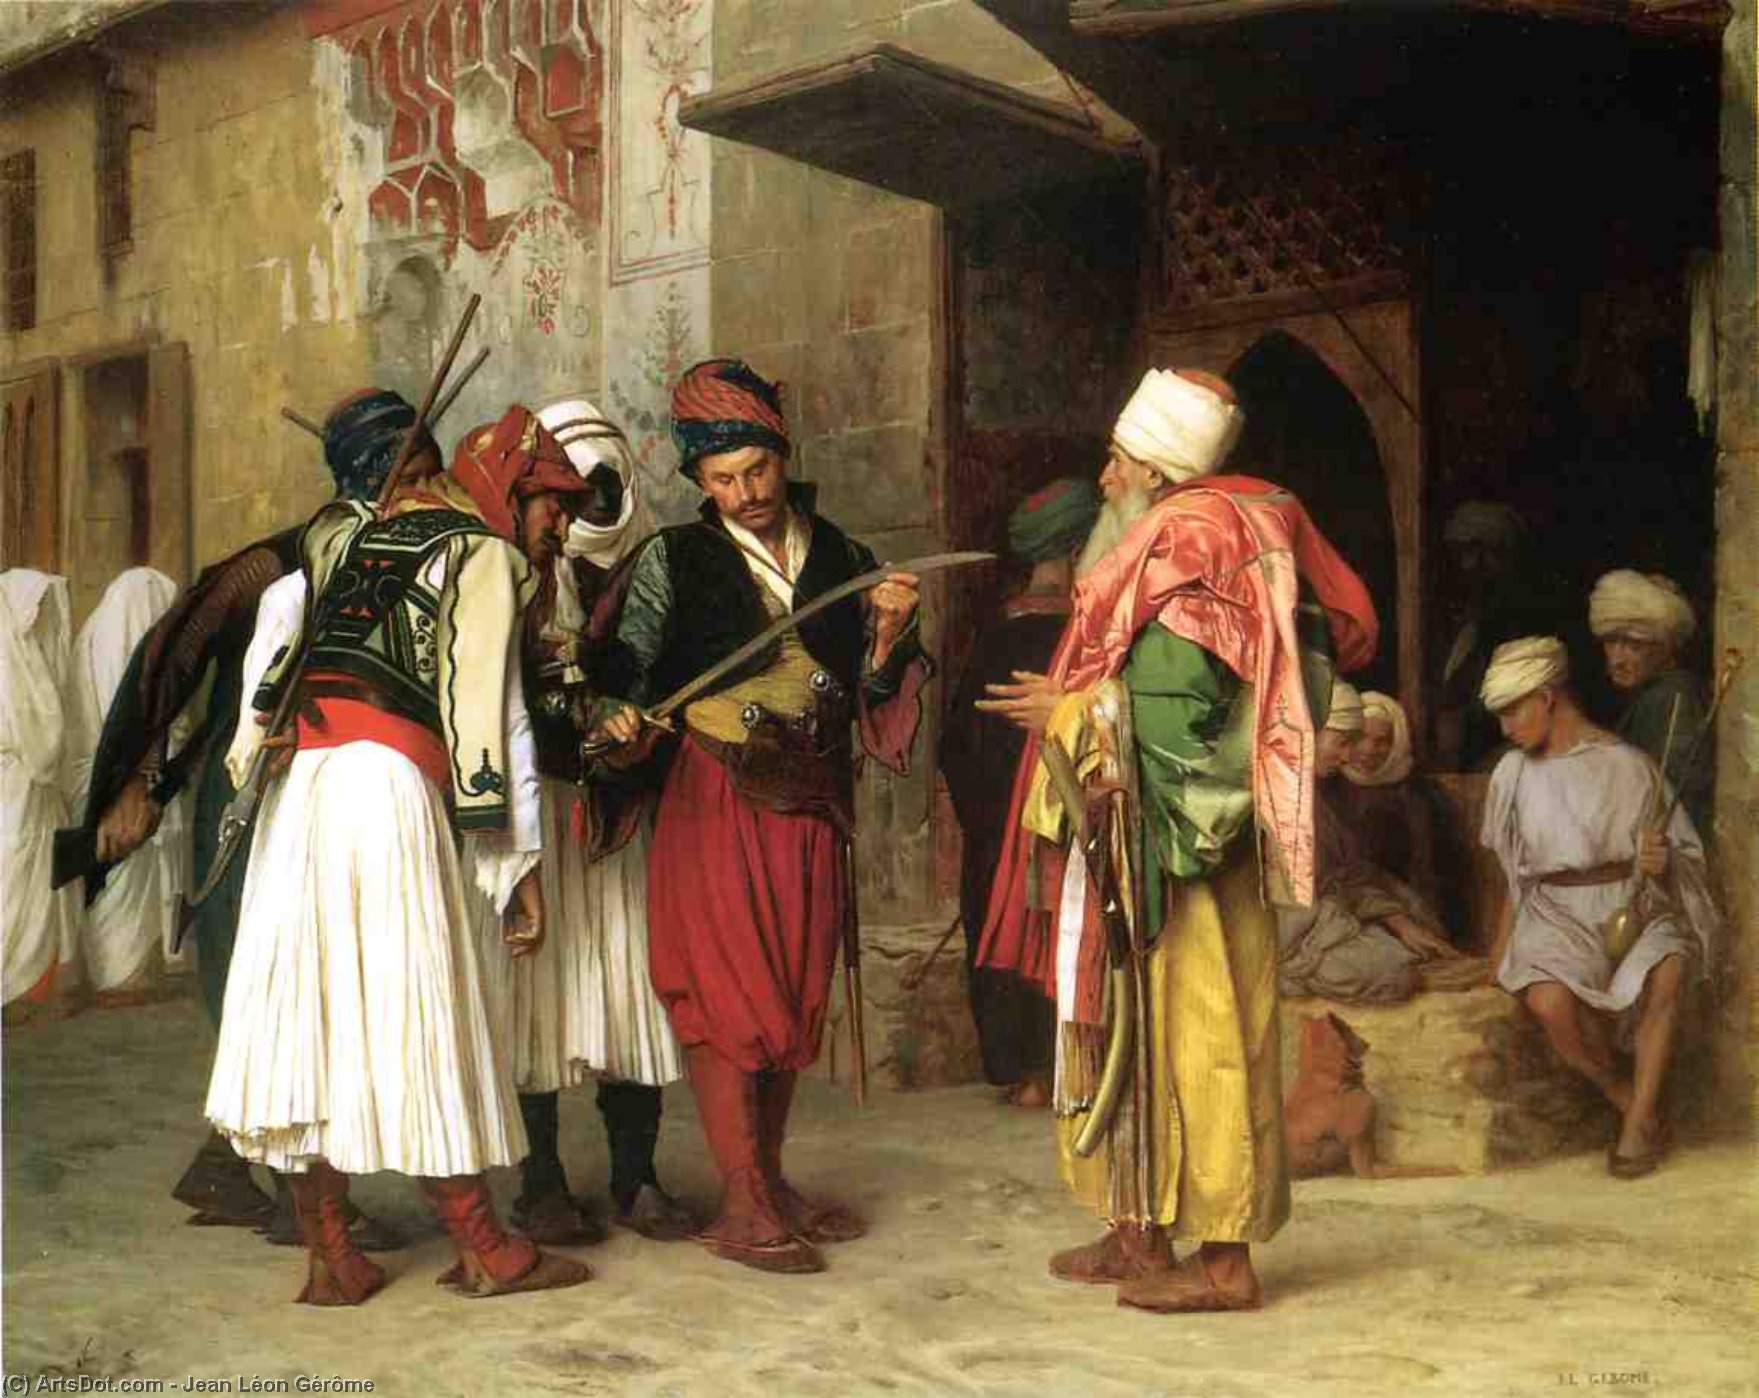 WikiOO.org - Encyclopedia of Fine Arts - Maalaus, taideteos Jean Léon Gérôme - Old Clothing Merchant in Cairo (also known as Roaving Merchant in Cairo)